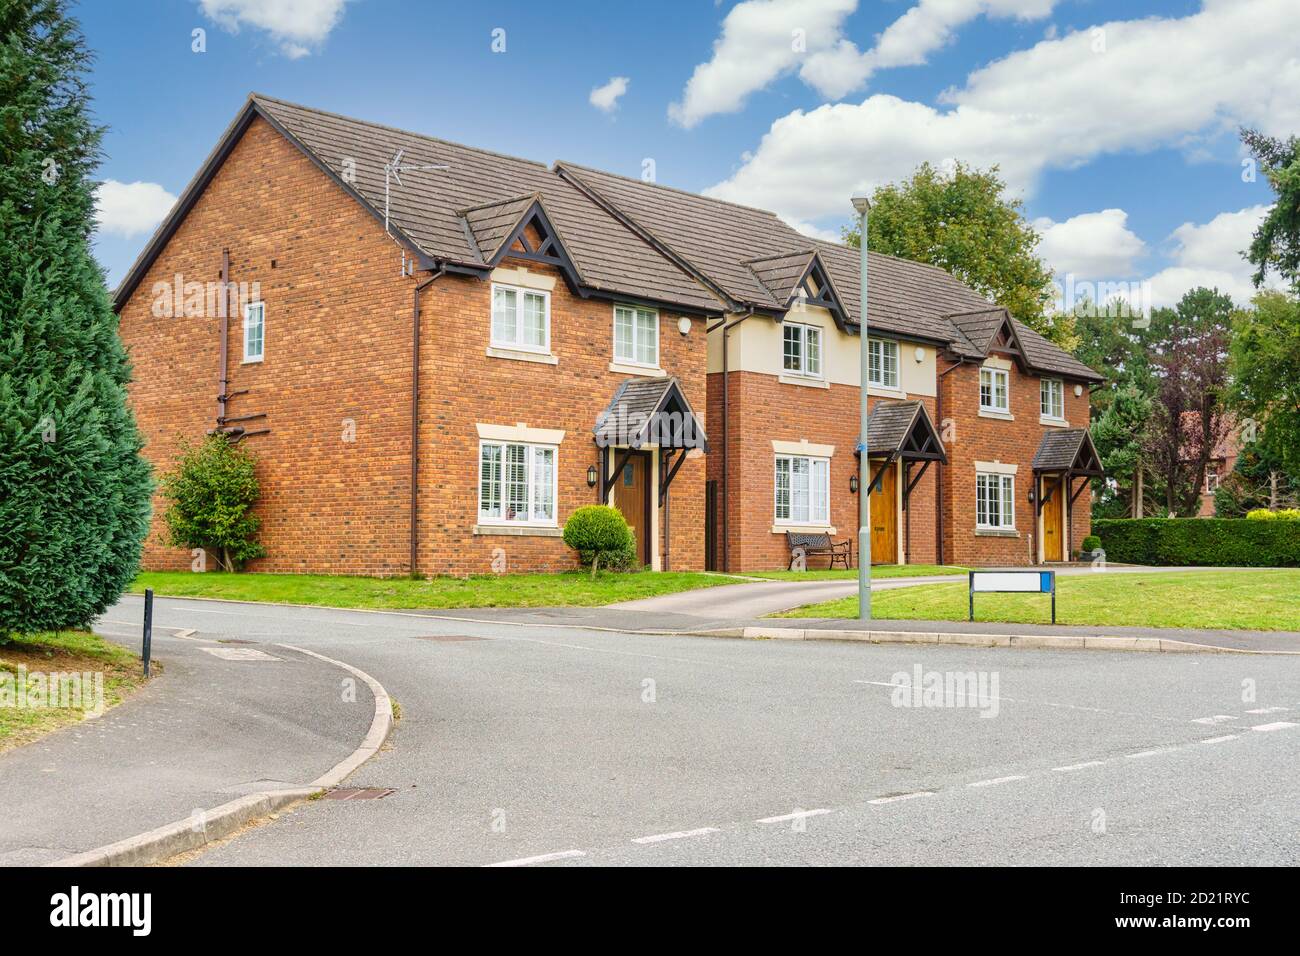 Modern residential housing development in a semi rural setting with detached houses in the United Kingdom Stock Photo